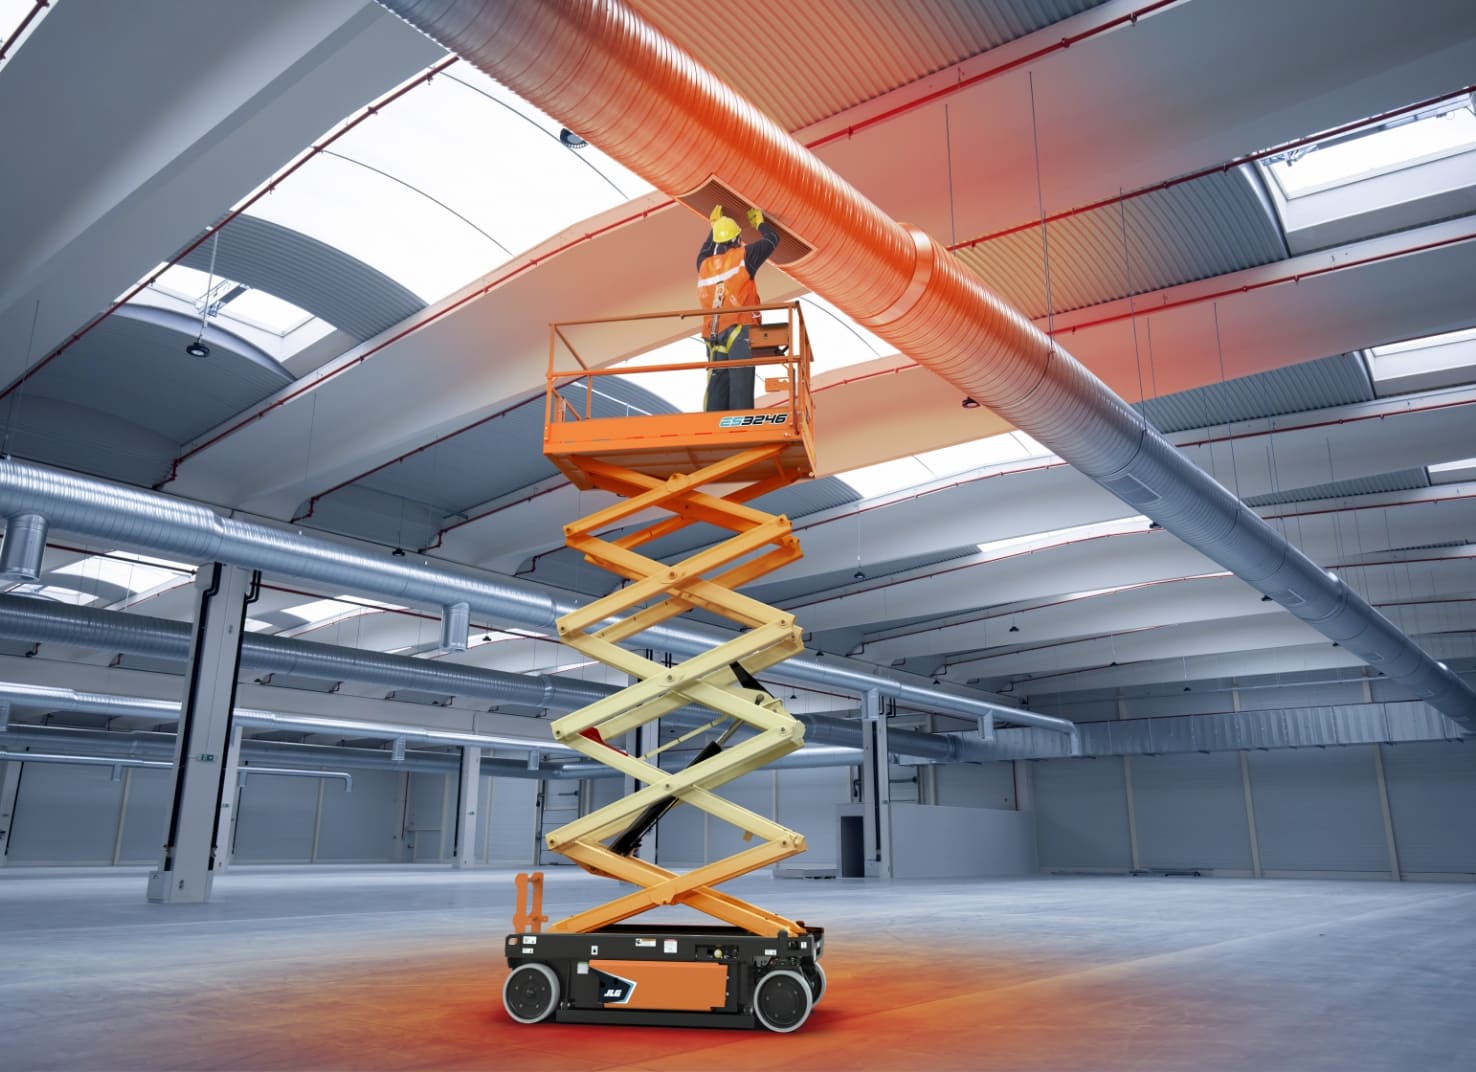 Worker stands on platform of electric scissor lift, checking overhead ductwork in large building.